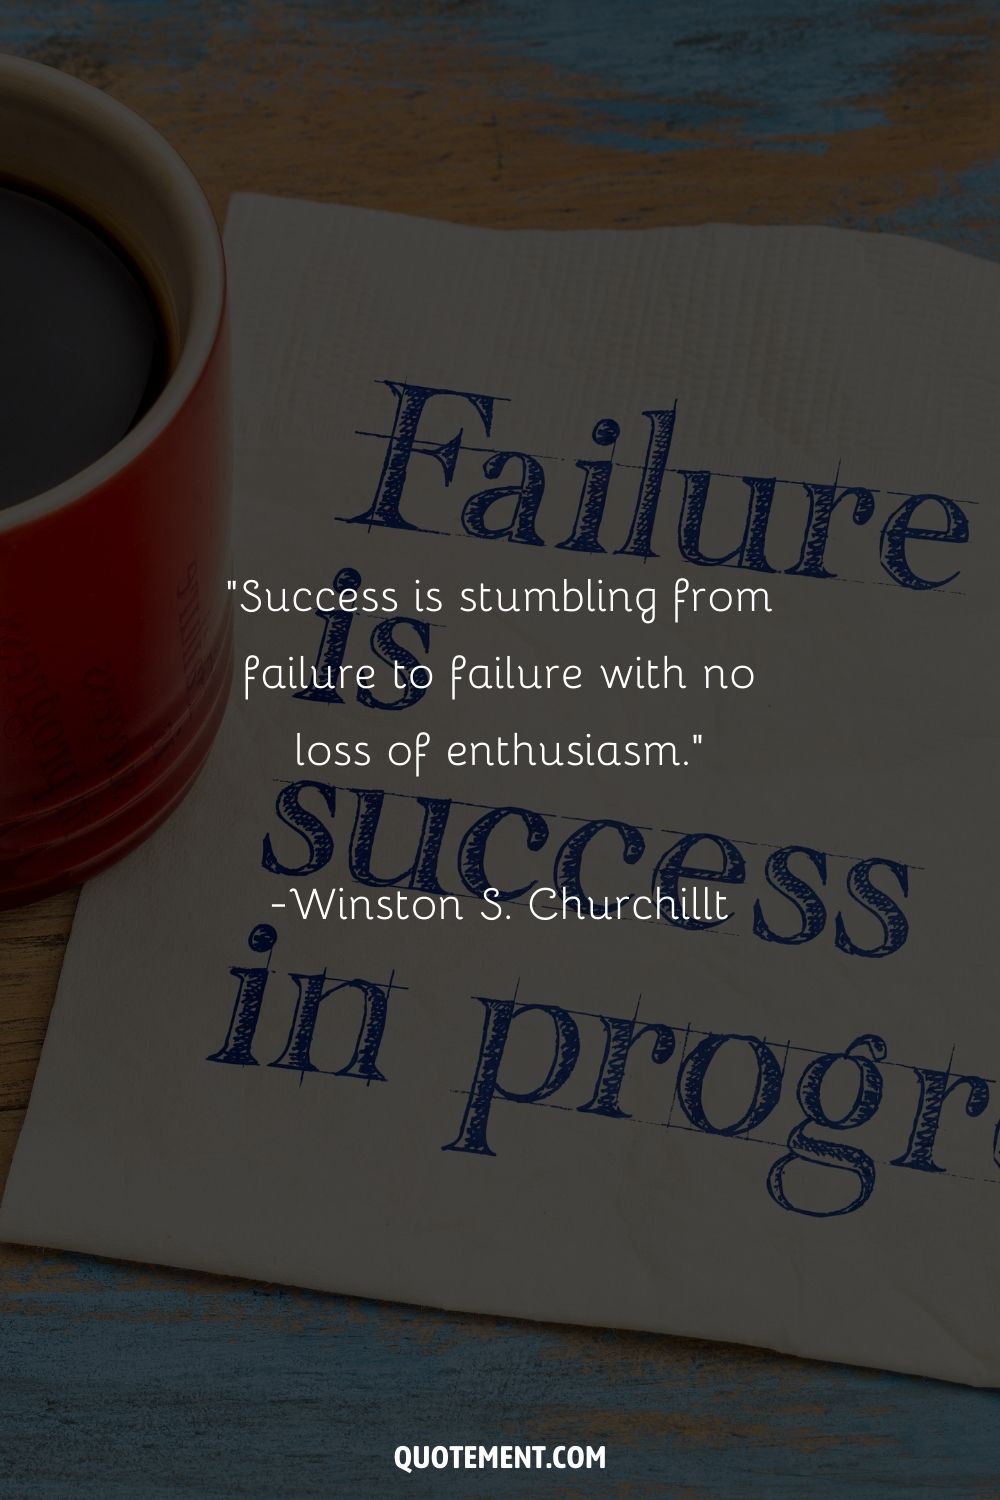 “Success is stumbling from failure to failure with no loss of enthusiasm.” ― Winston S. Churchill